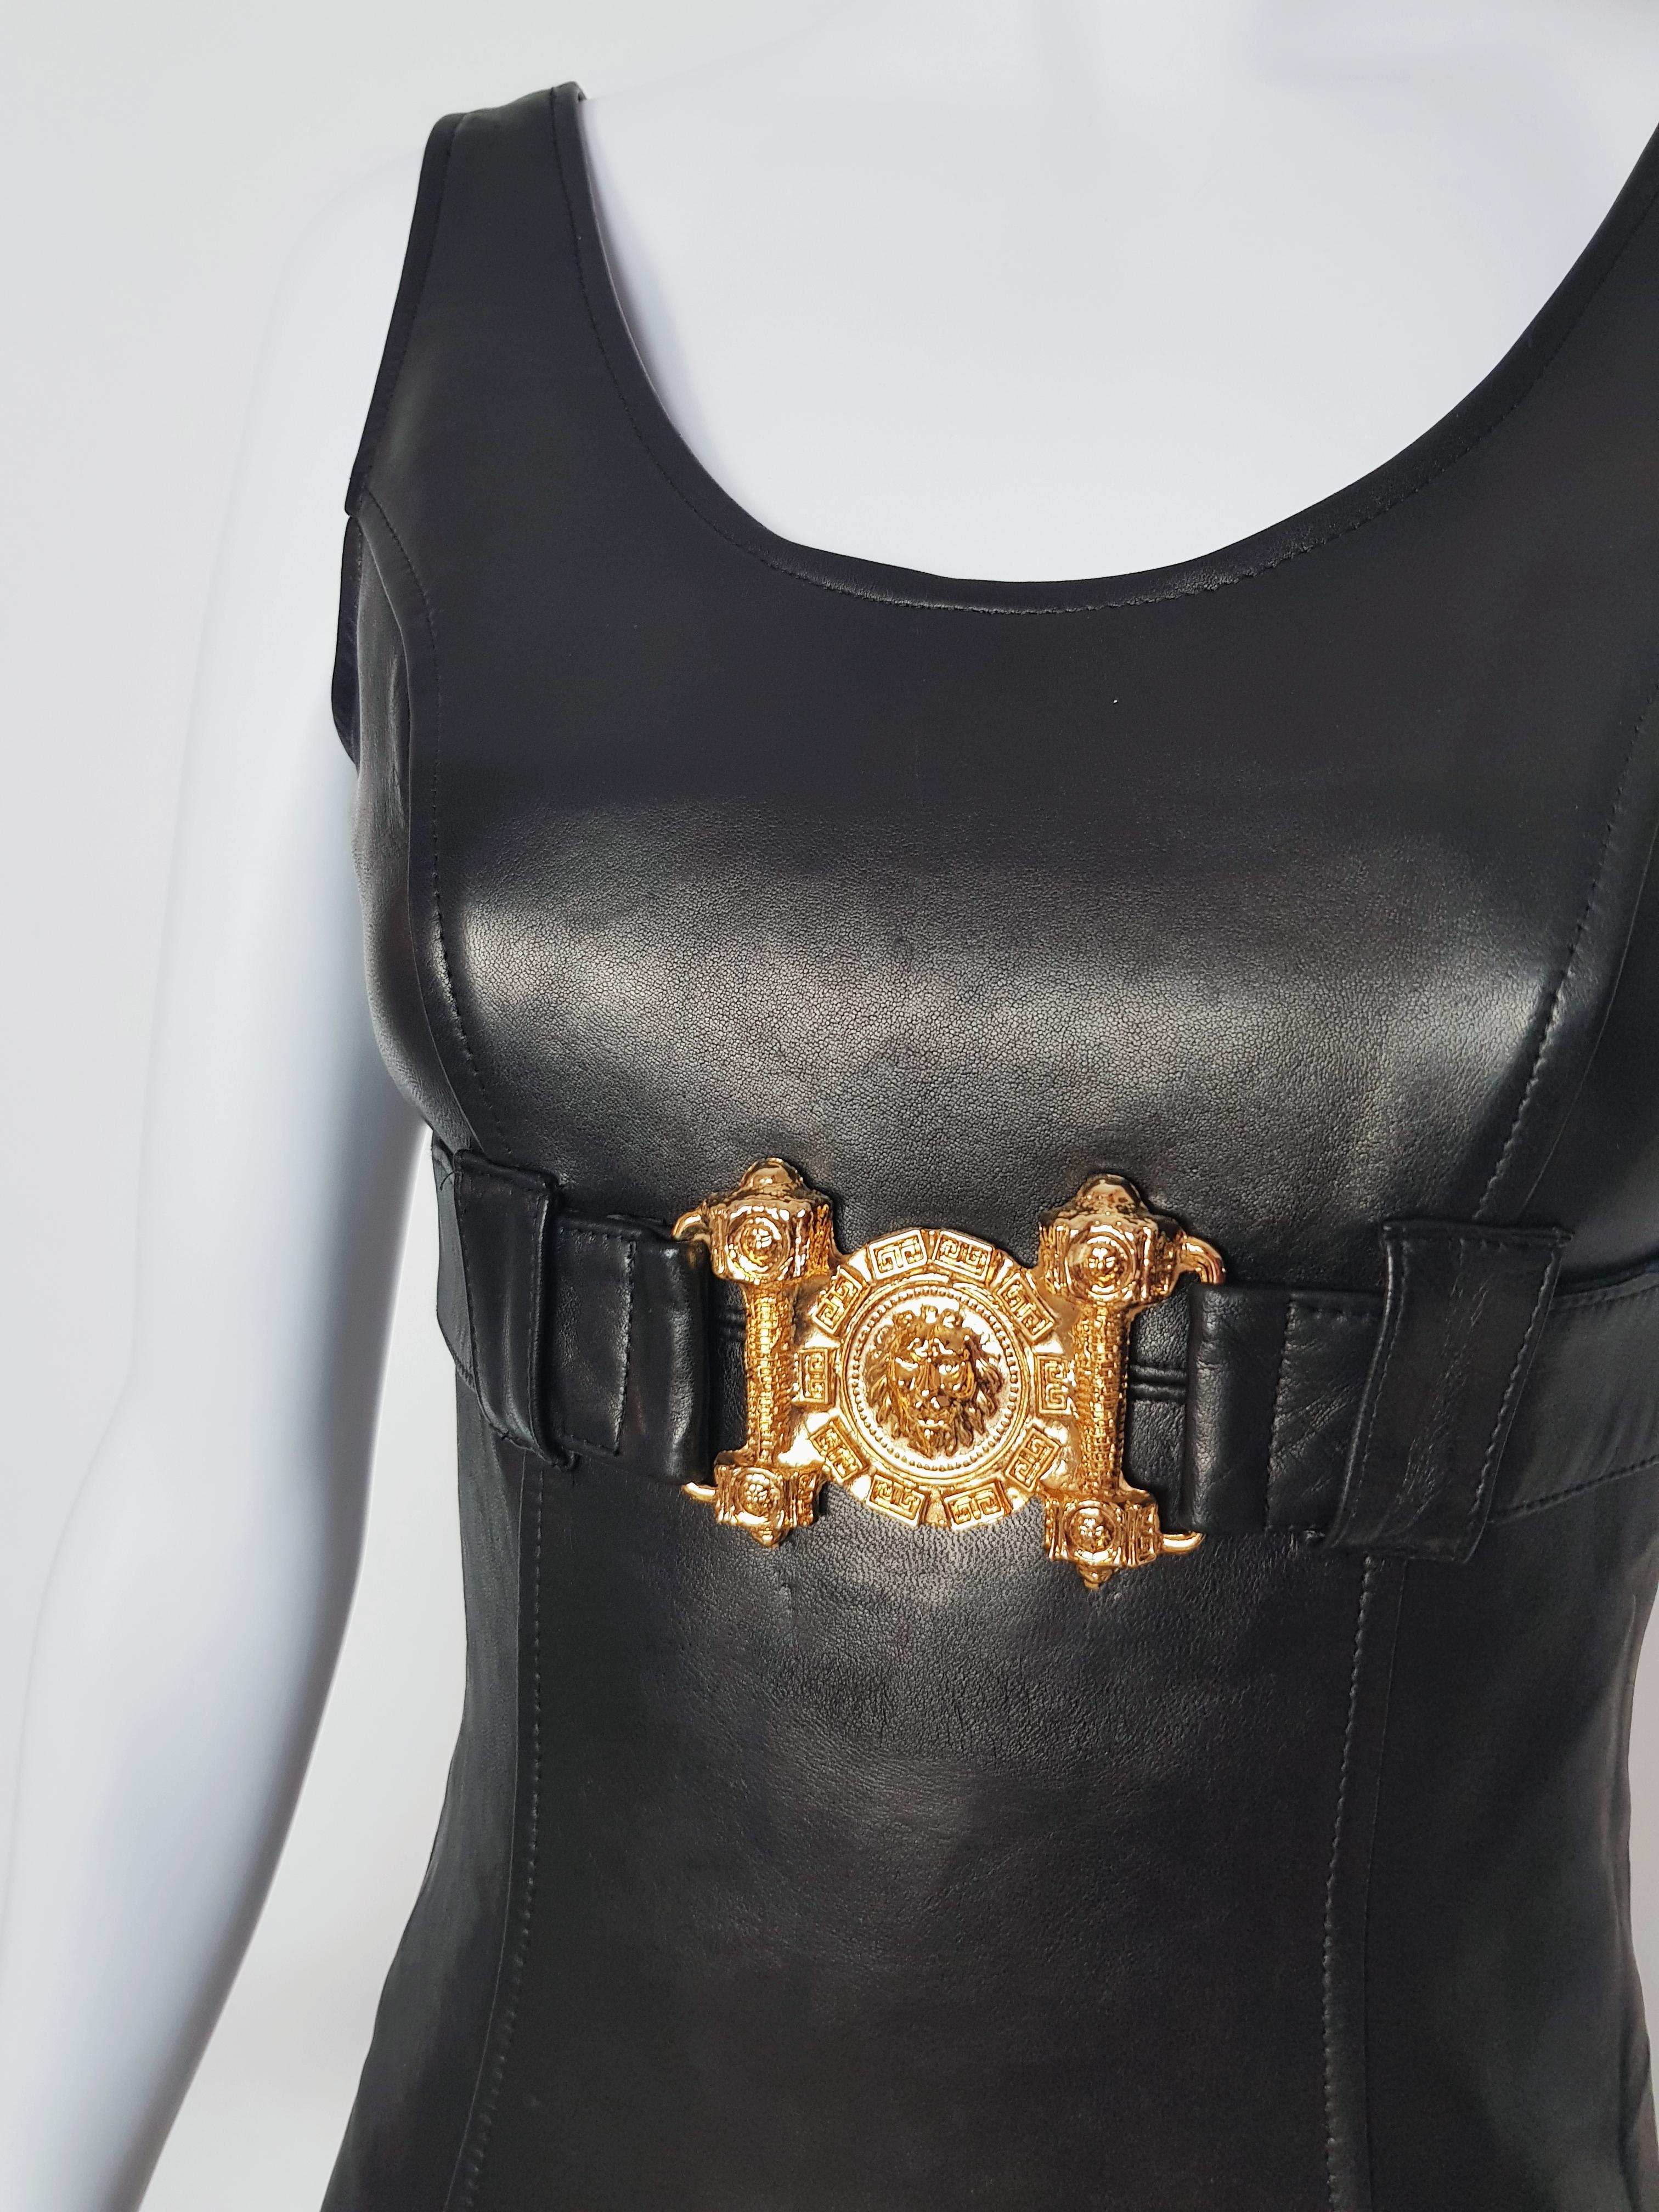 This vintage dress from Alberto Bini is coming directly from the 90s, and it's also a beautiful ode to Versace universe.

-Lion detail in metal gold tone
-Front leather
-Back knit fabric very stretchy
-Lined in the leather part
-Made in France
-100%